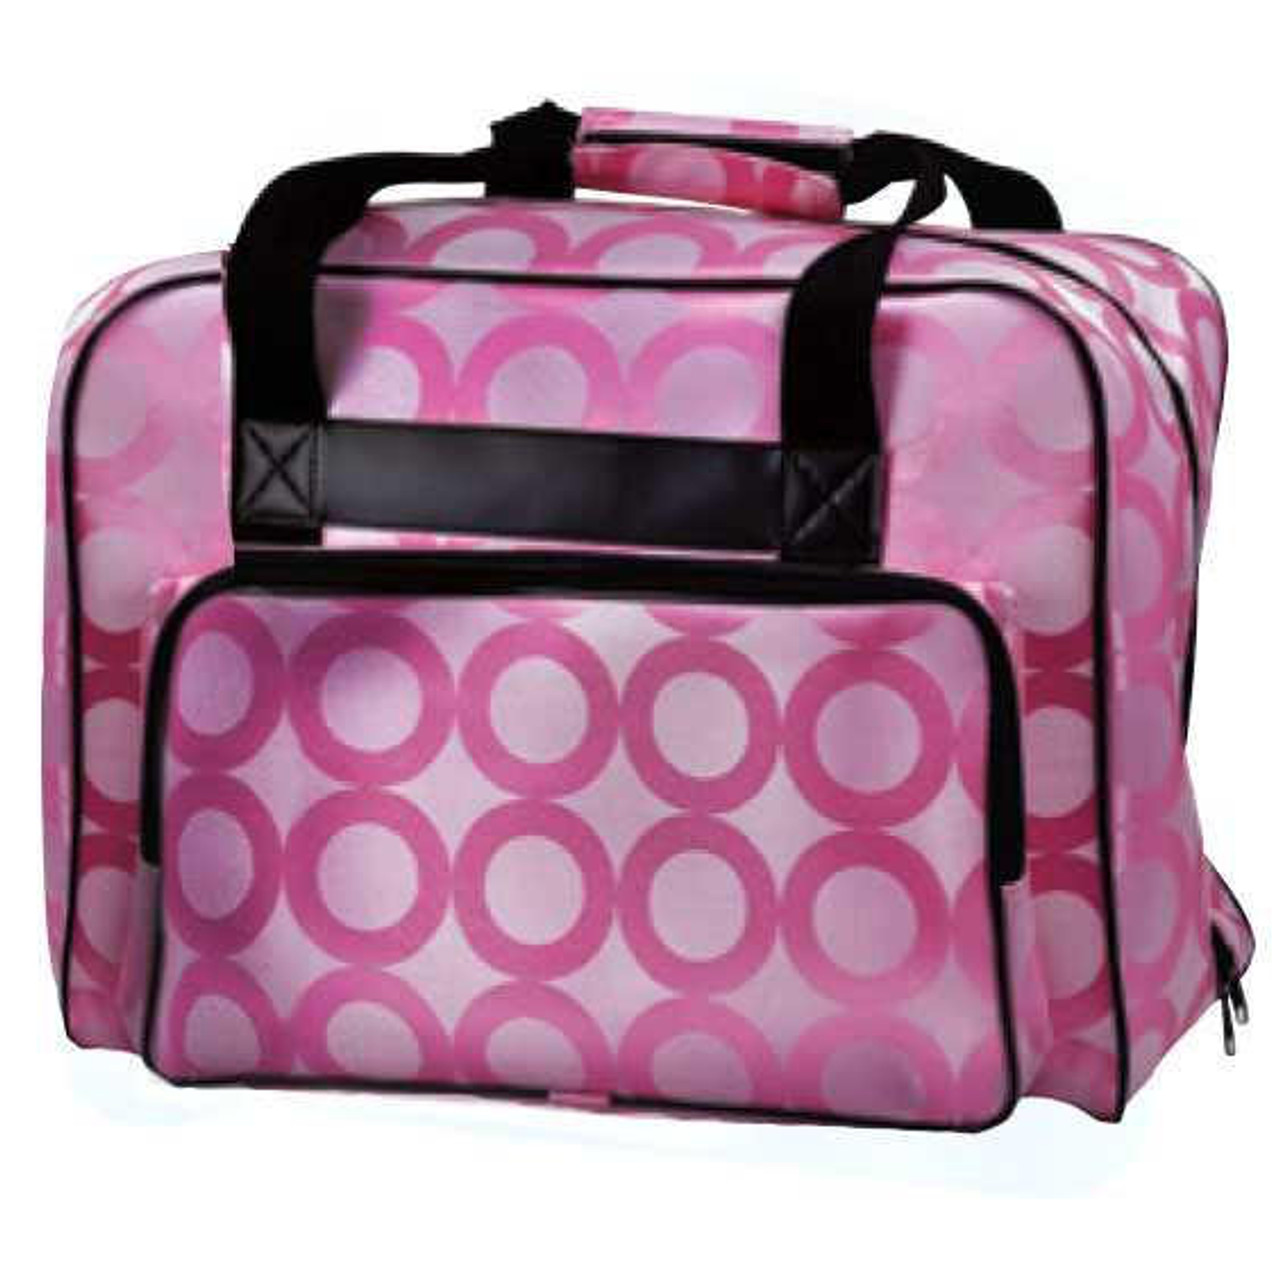 Janome Sewing Machine Tote Bag in Pink with Pink Pattern